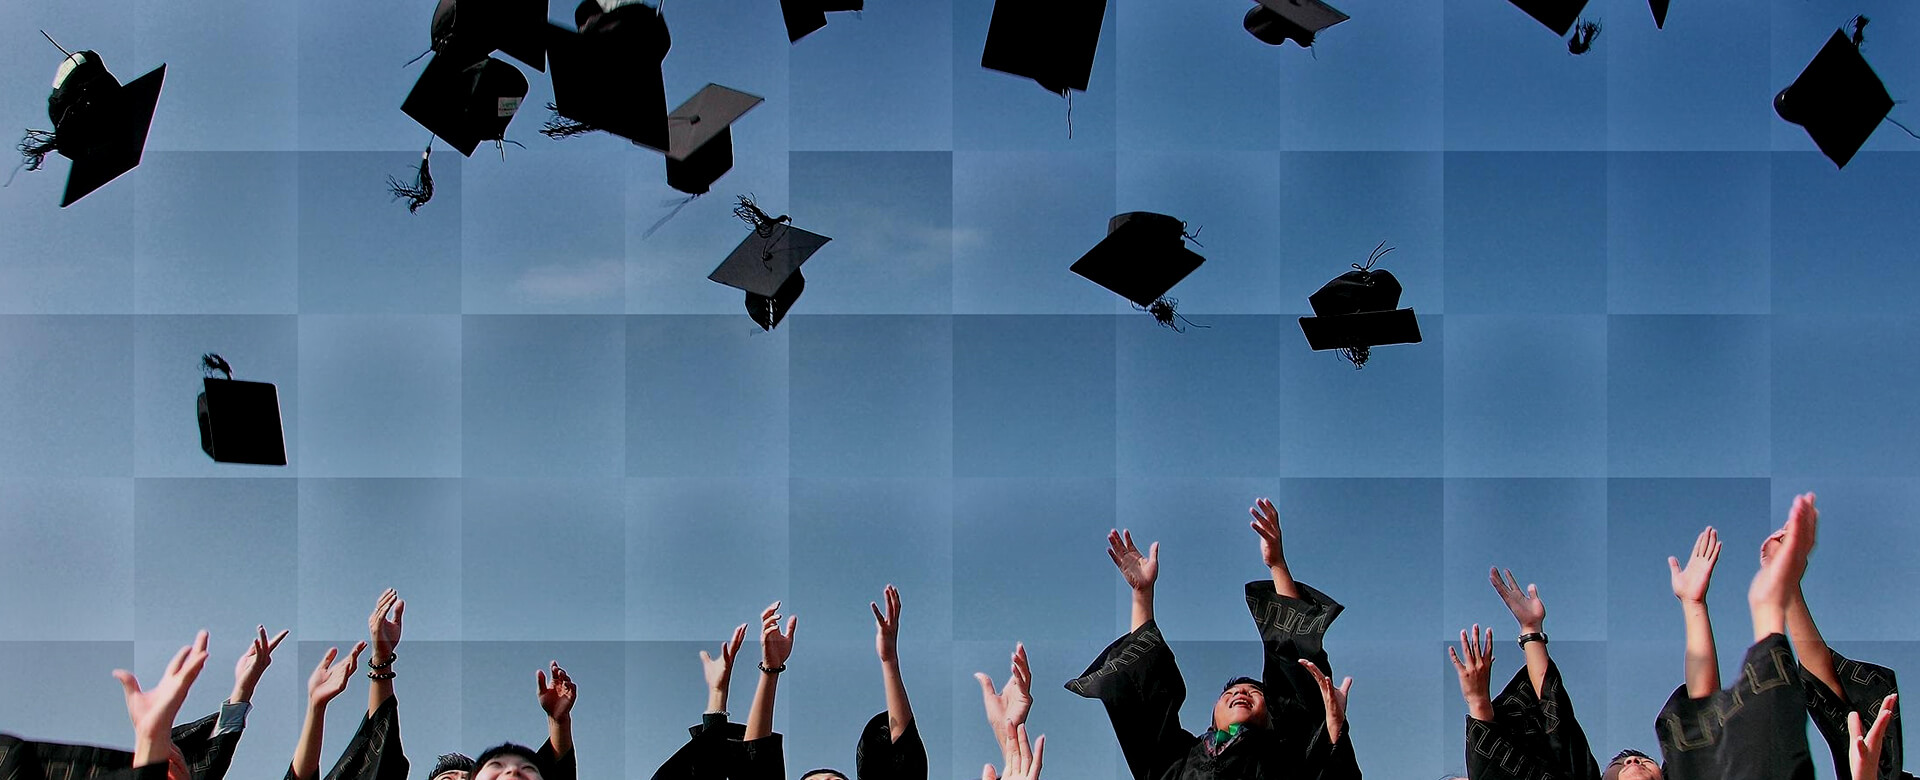 Background of college graduates throwing their caps into the air